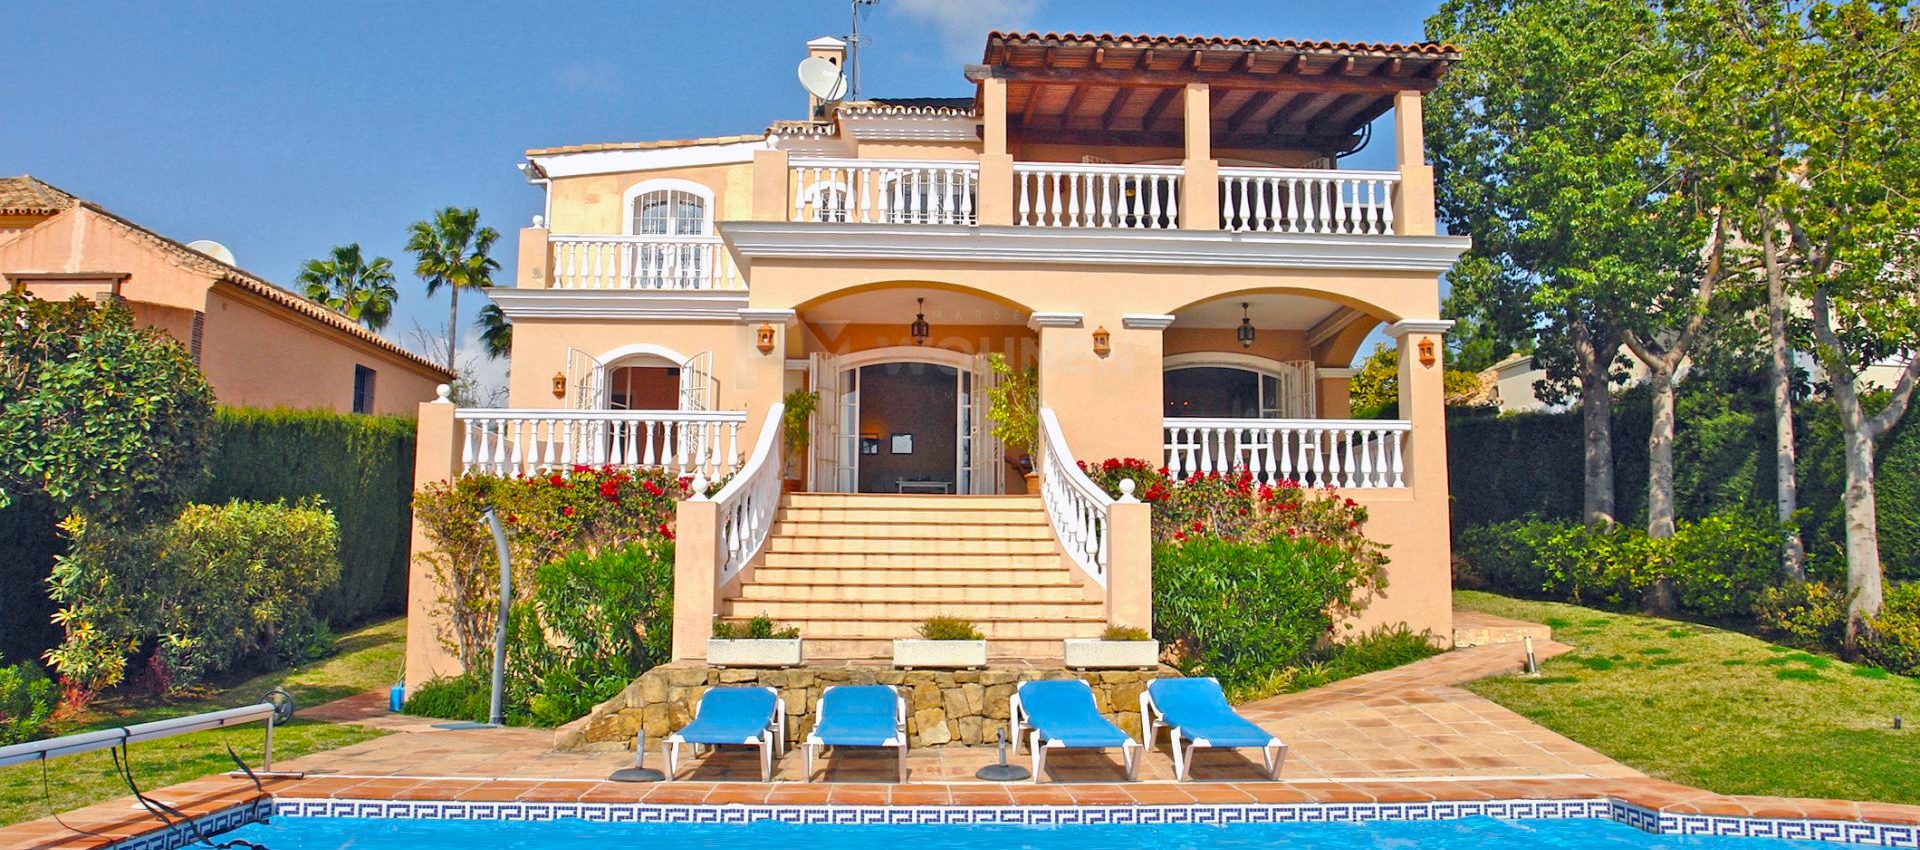 Beautiful Andalusian style property located in a popular golf urbanization west of Marbella